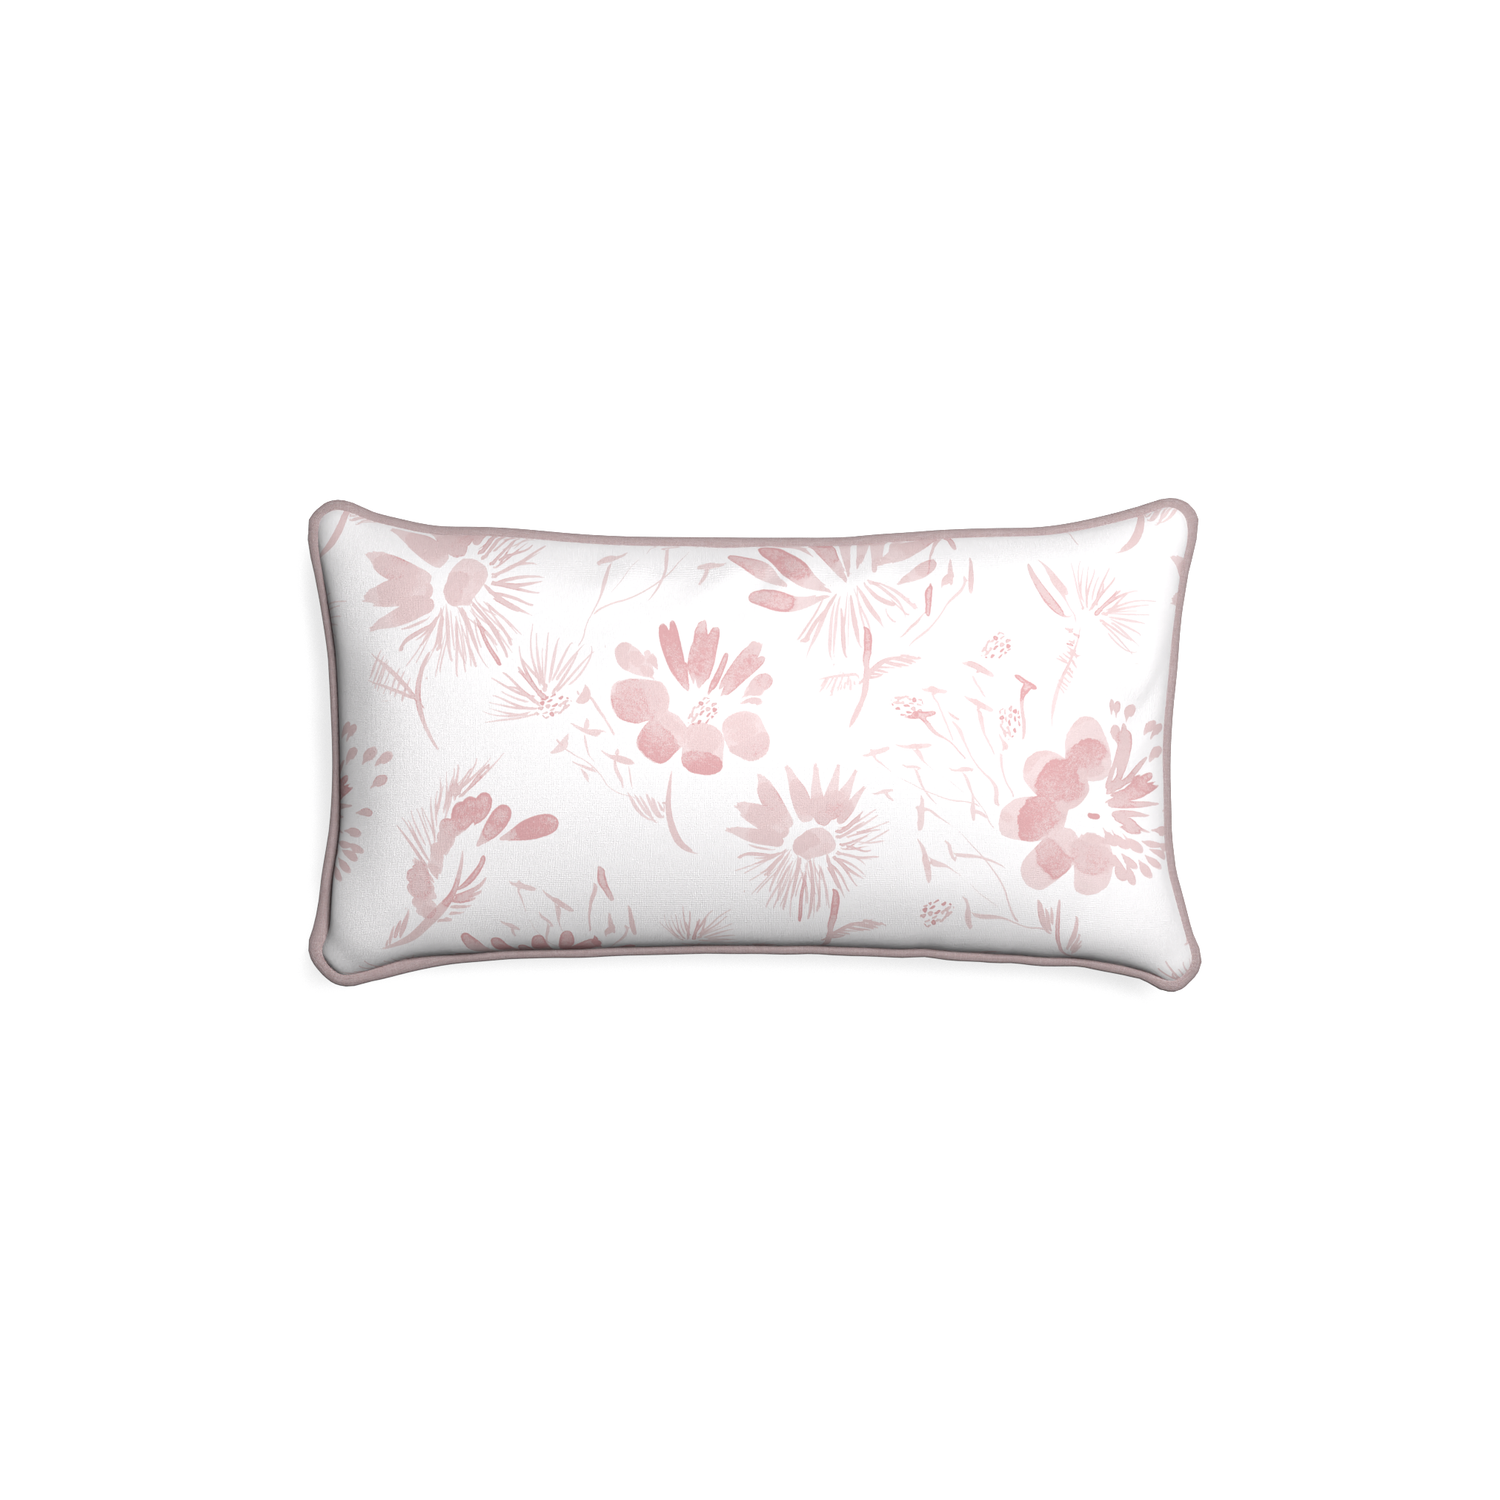 Petite-lumbar blake custom pink floralpillow with orchid piping on white background